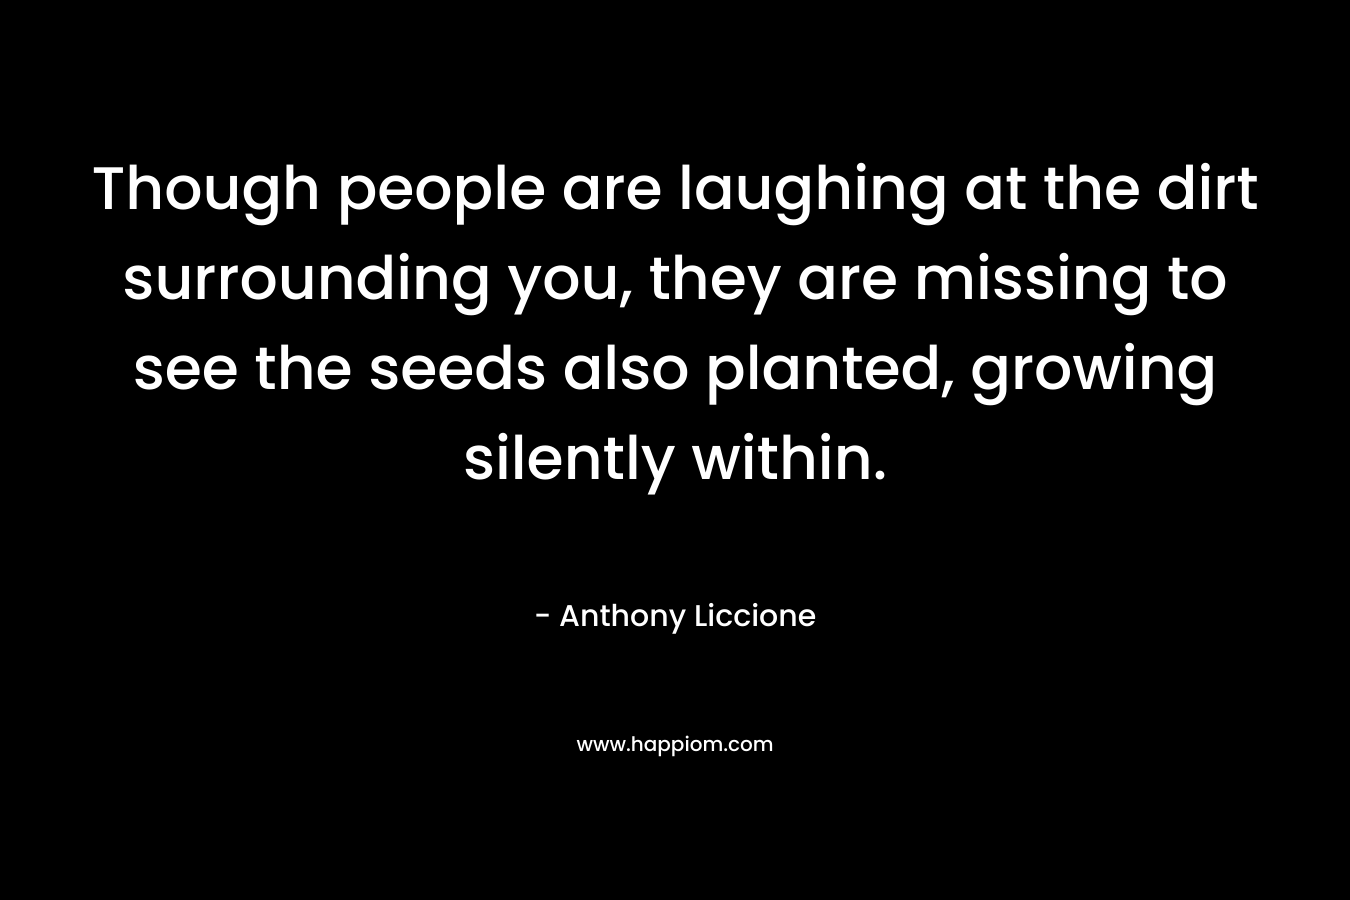 Though people are laughing at the dirt surrounding you, they are missing to see the seeds also planted, growing silently within. – Anthony Liccione